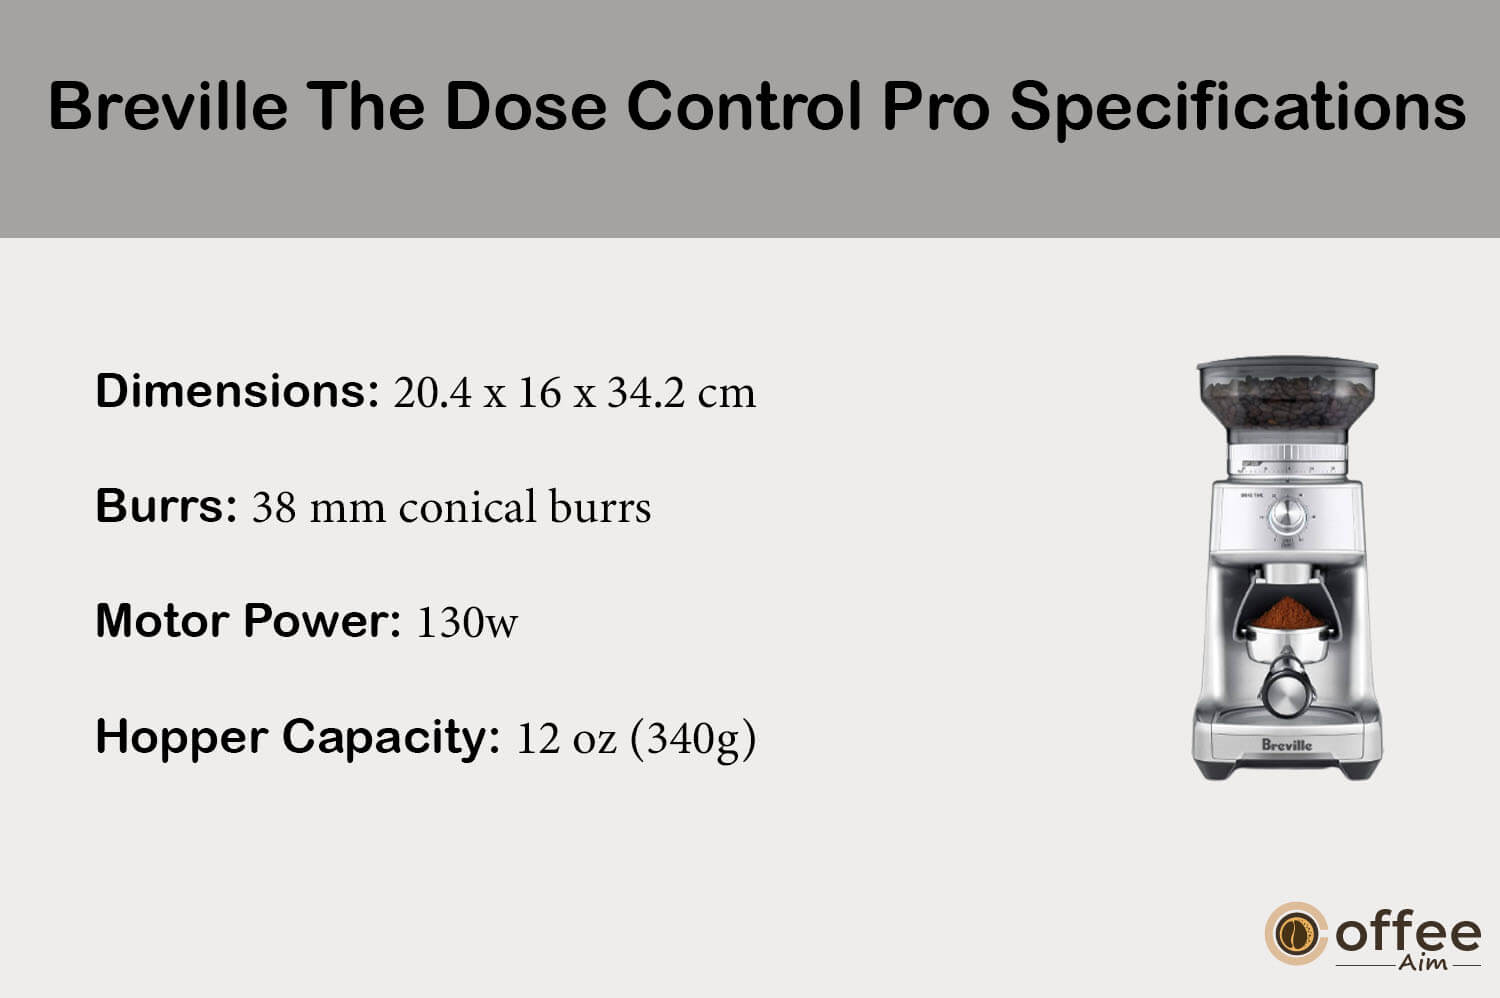 This visual encapsulates the technical specifications of the "Breville The Dose Control Pro," providing a comprehensive overview for the article's review titled "Exploring the Precision of Breville The Dose Control Pro."